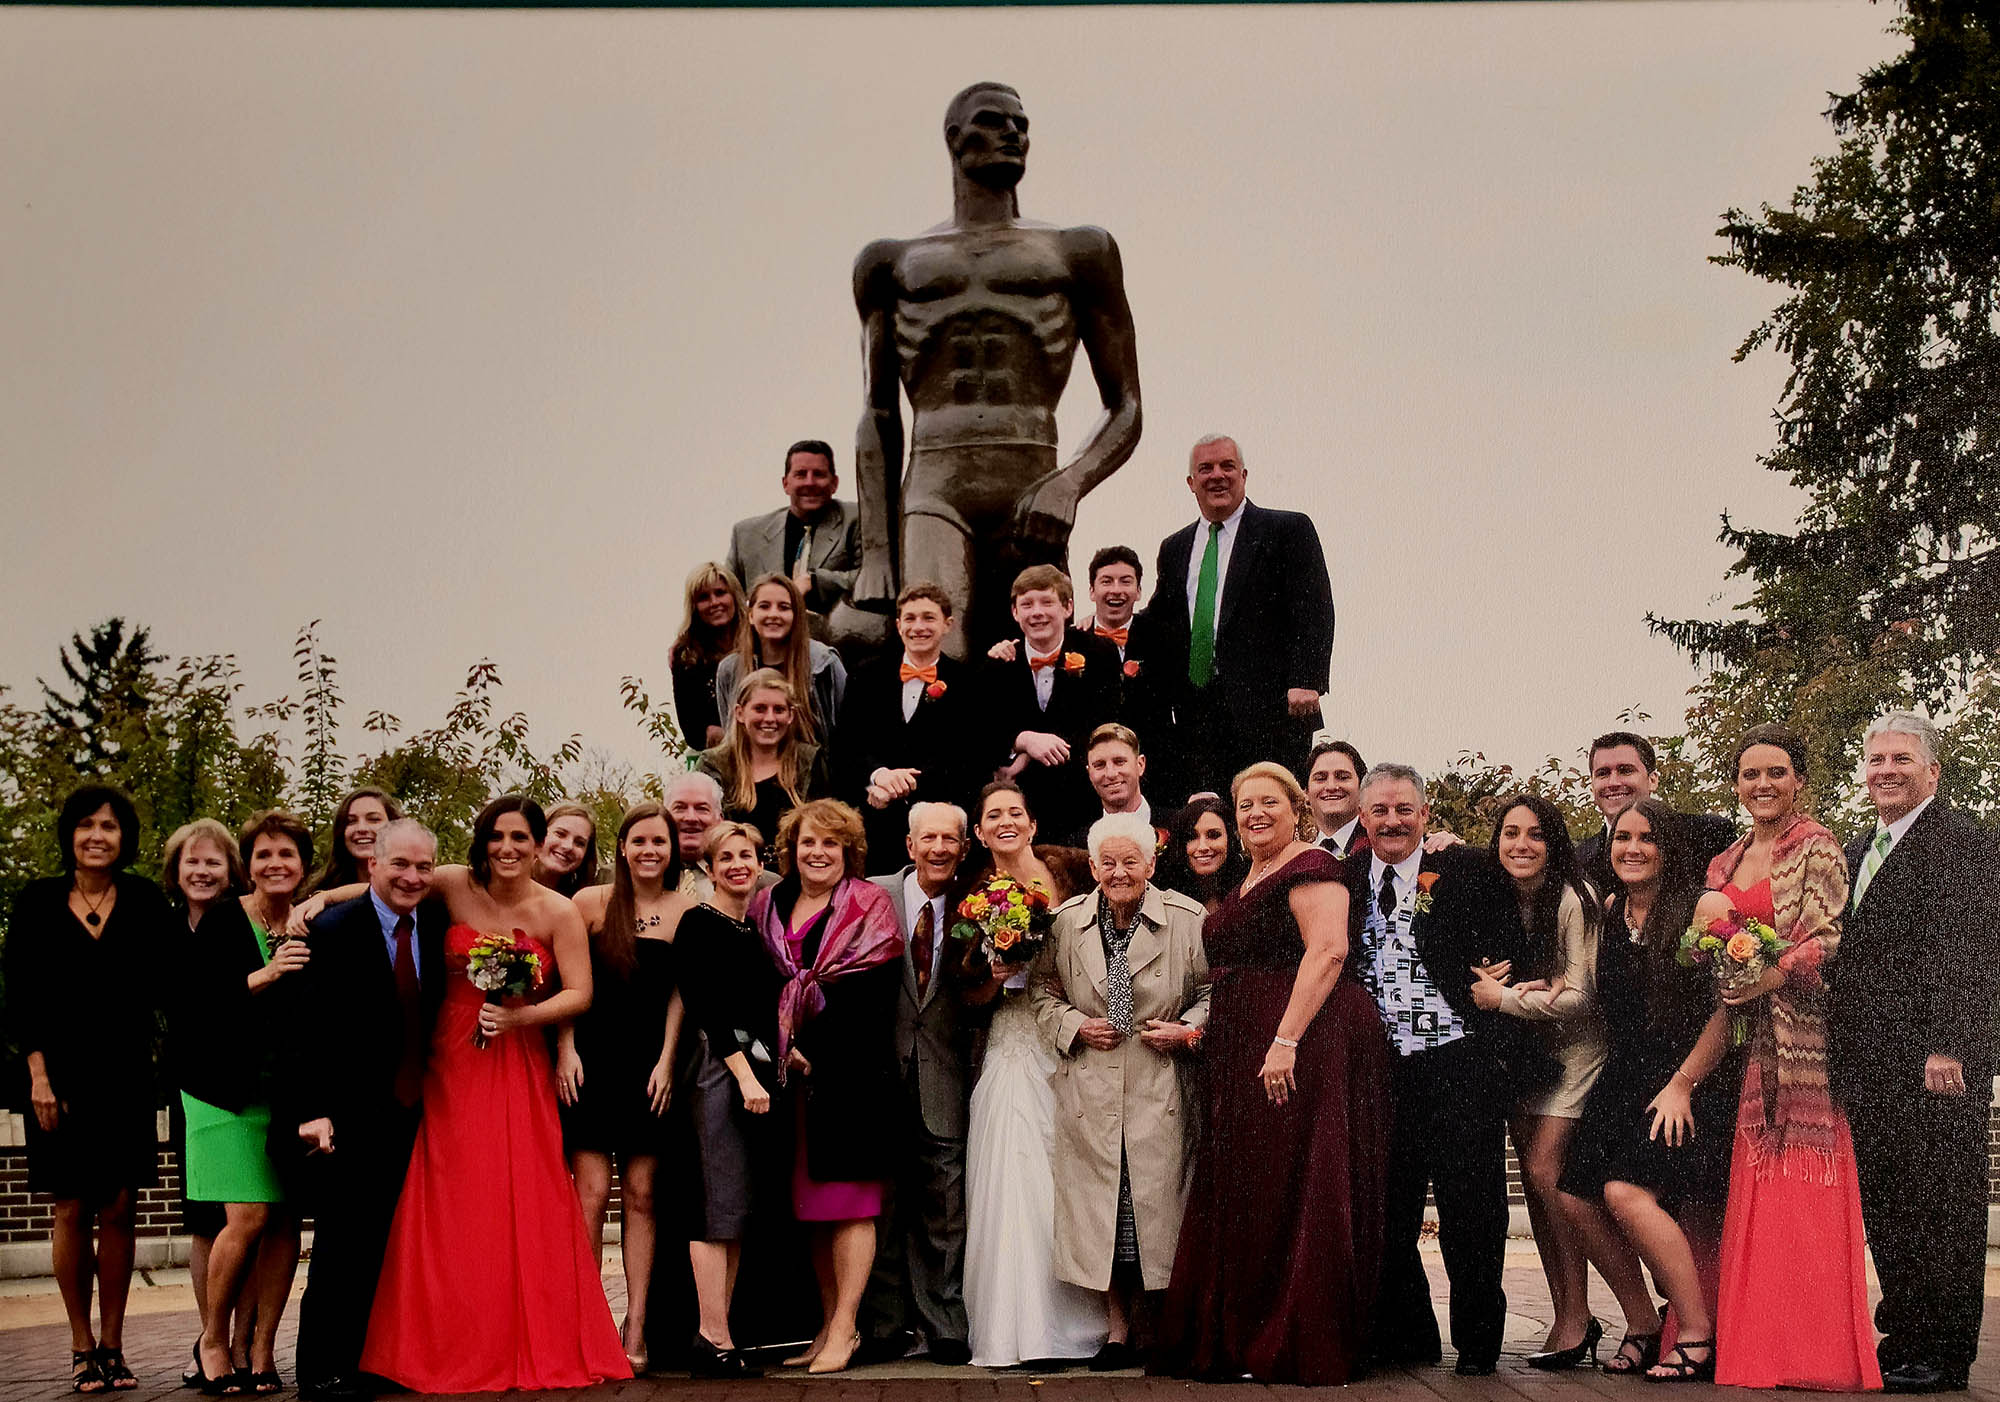 Kerri Cash and wedding party in front of Spartan statue